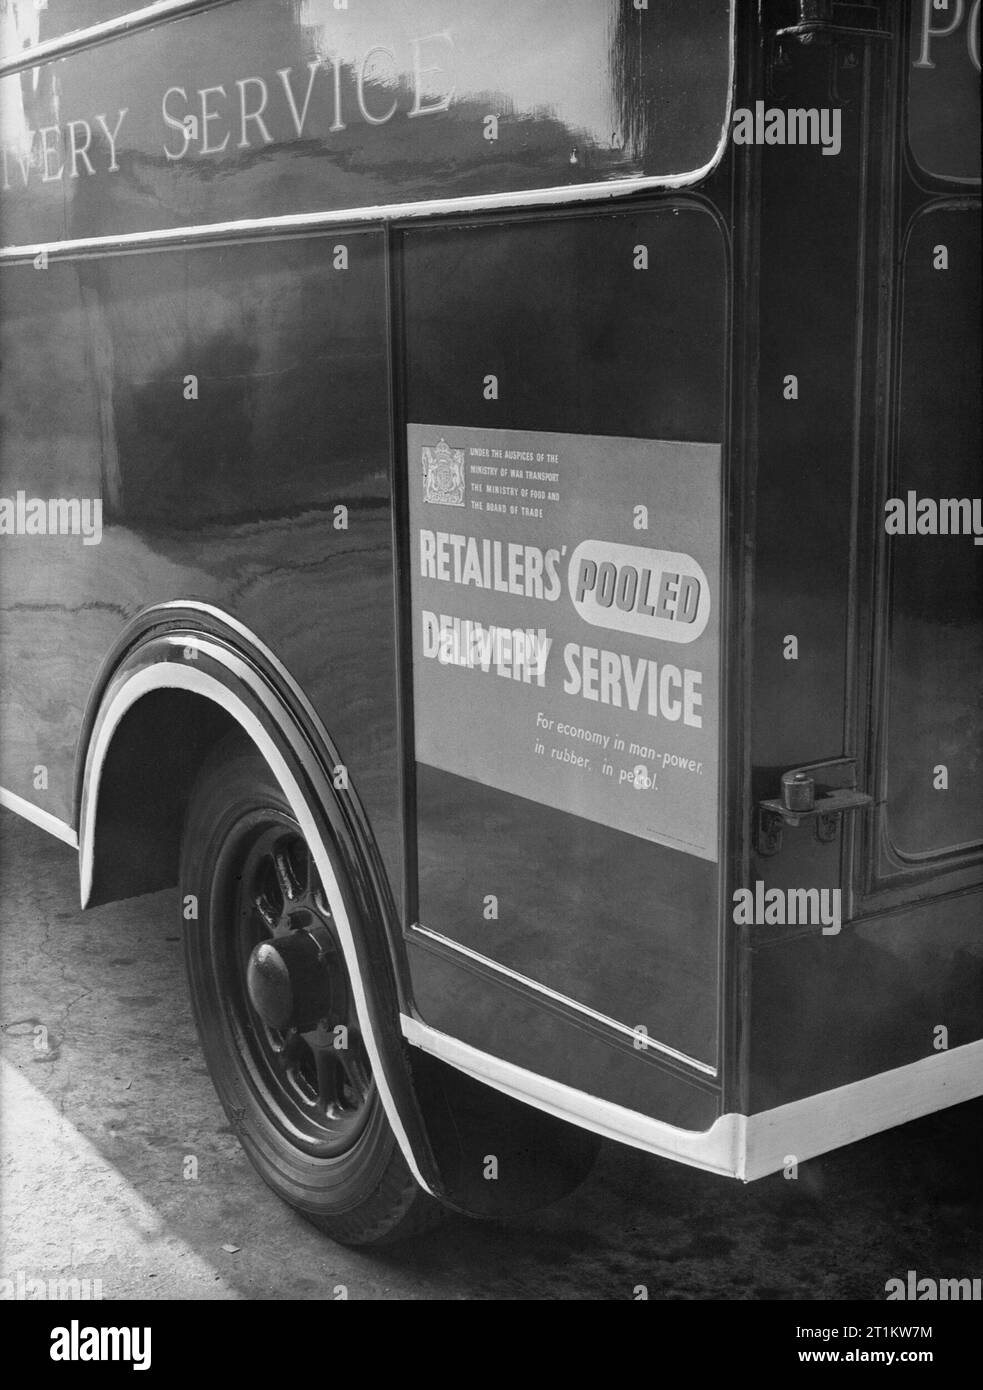 Wartime Fuel Economy- Pooled Delivery Service Van, 1942 A close up of the back of a van showing the sticker which reads 'Under the auspices of the Ministry of War Transport, the Ministry of Food and the Board of Trade. Retailers' Pooled Delivery Service. For economy in man-power, in rubber, in petrol'. Stock Photo